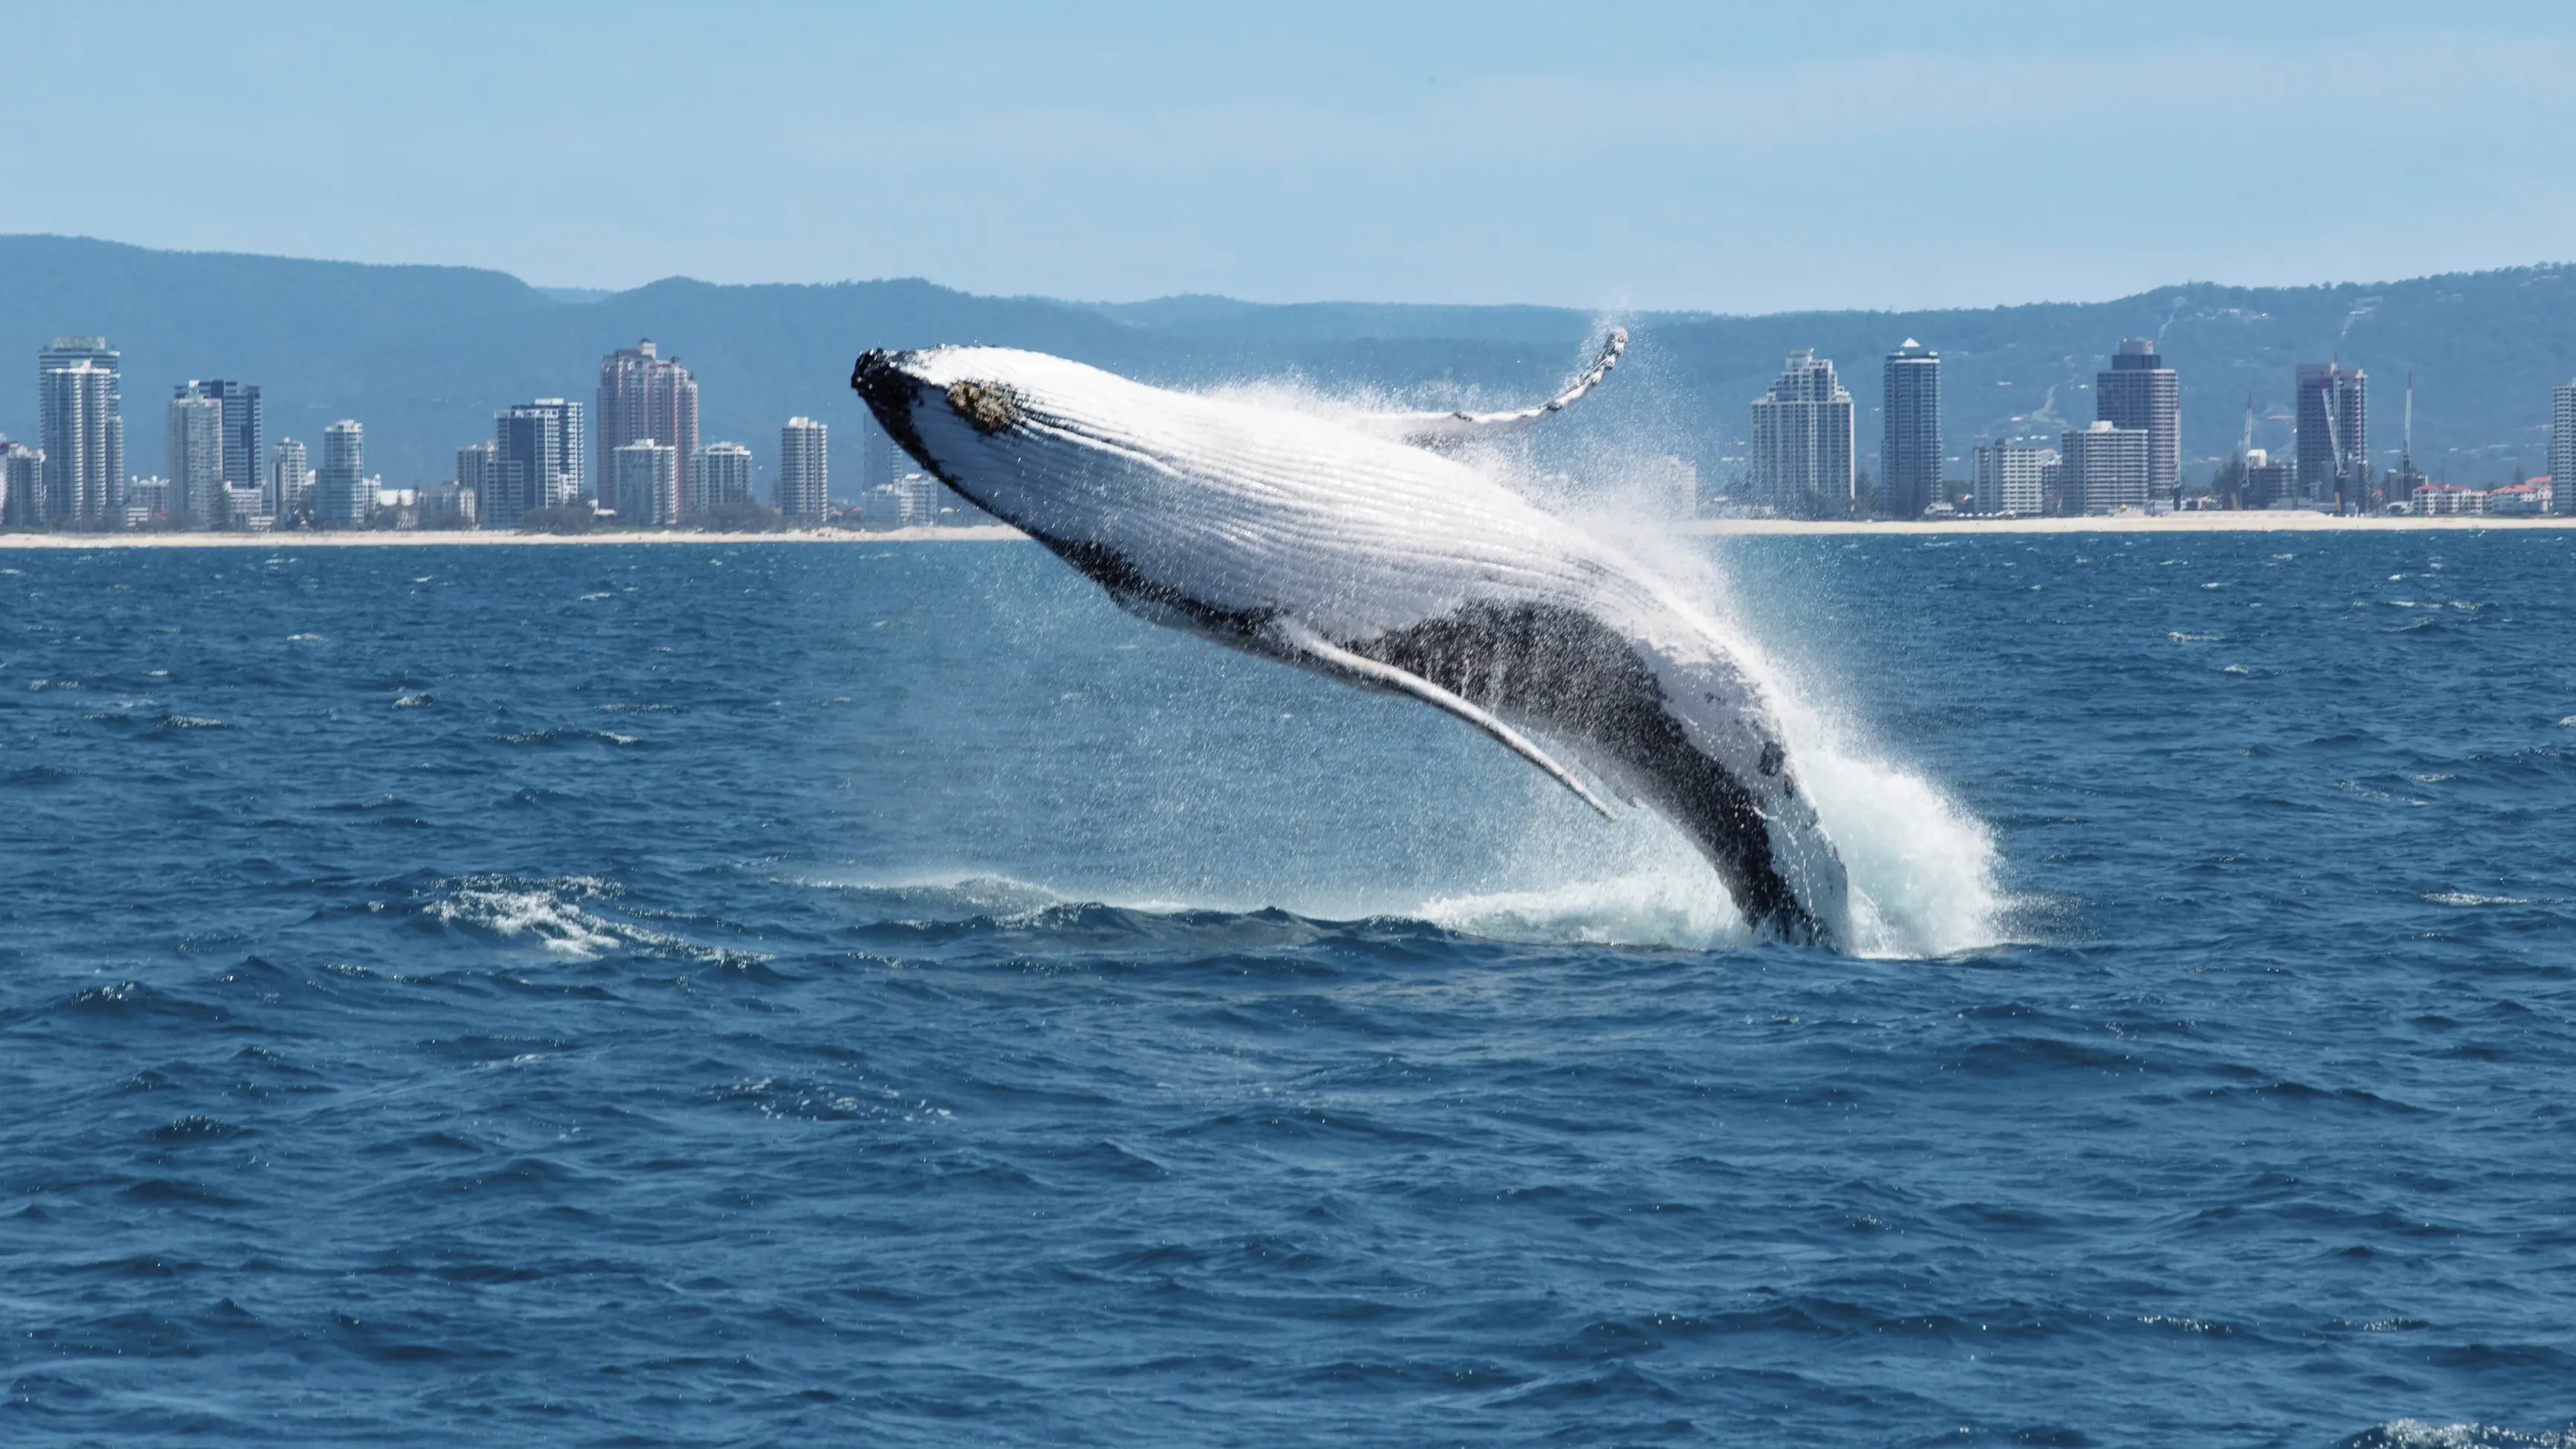 Humpback whale leaping out of the water, with Surfers Paradise skyline in background. Image credit: Tourism and Events Queensland